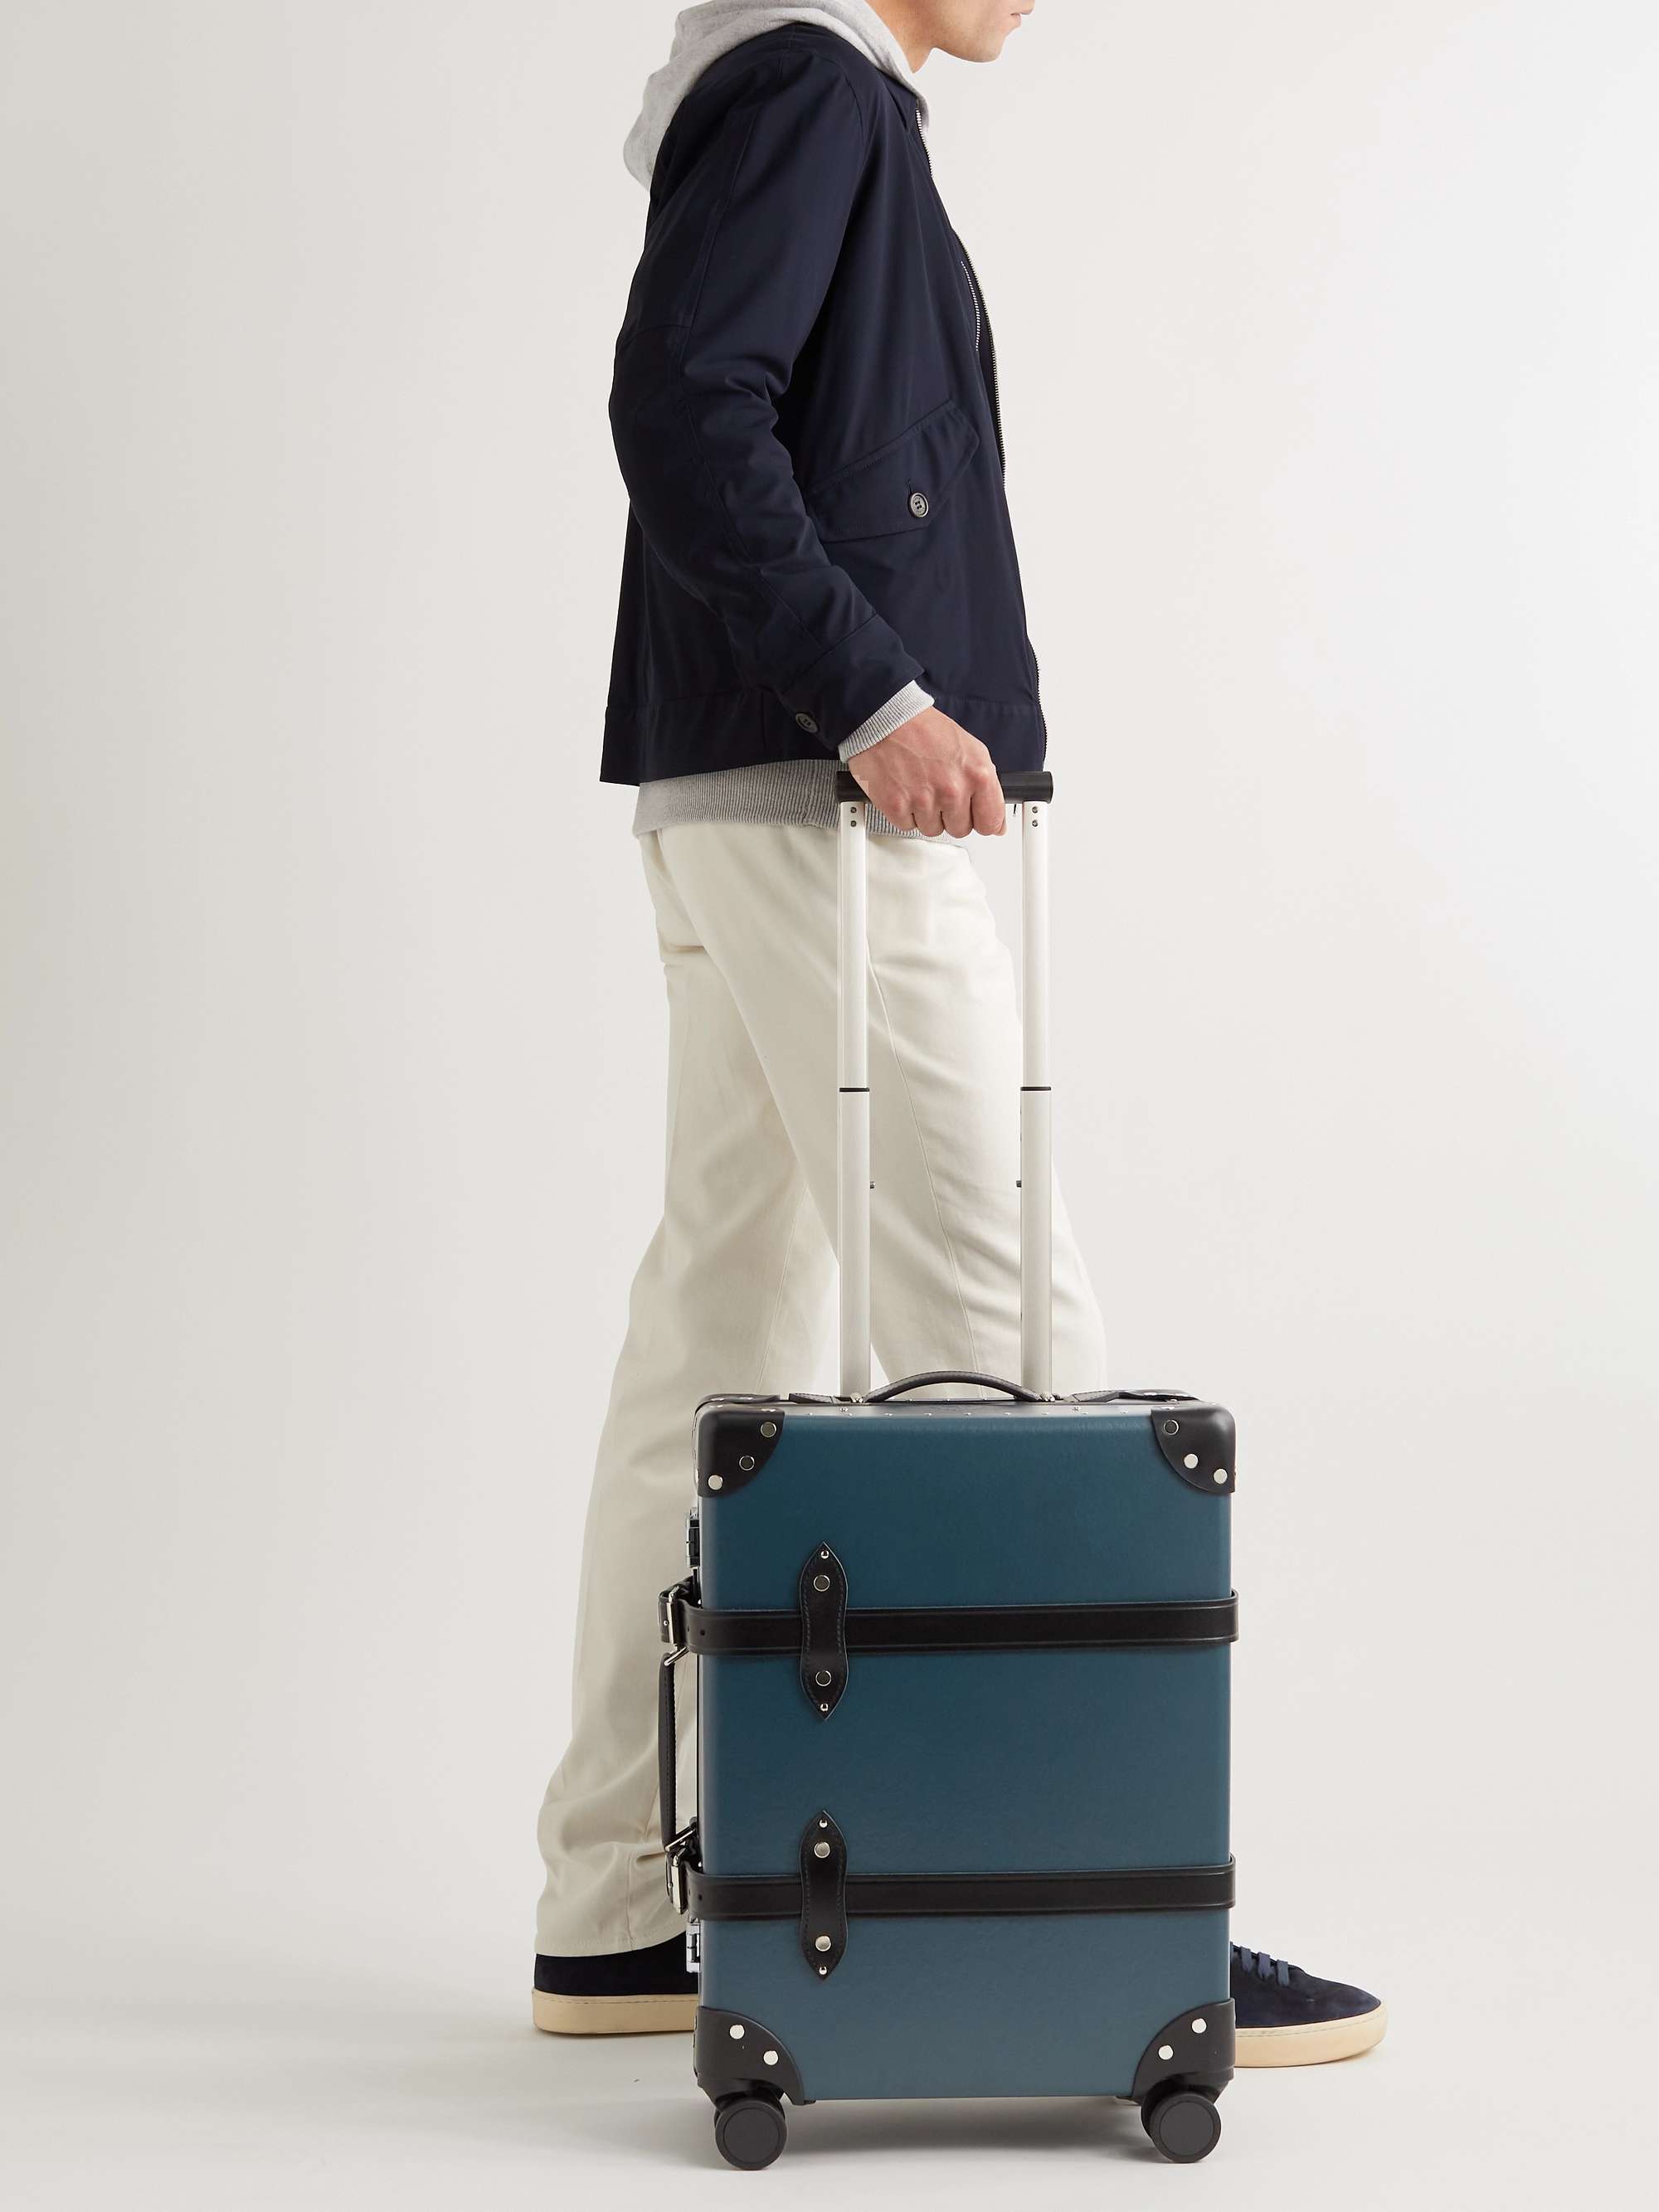 GLOBE-TROTTER + Dr. No Carry-On Leather-Trimmed Trolley Suitcase